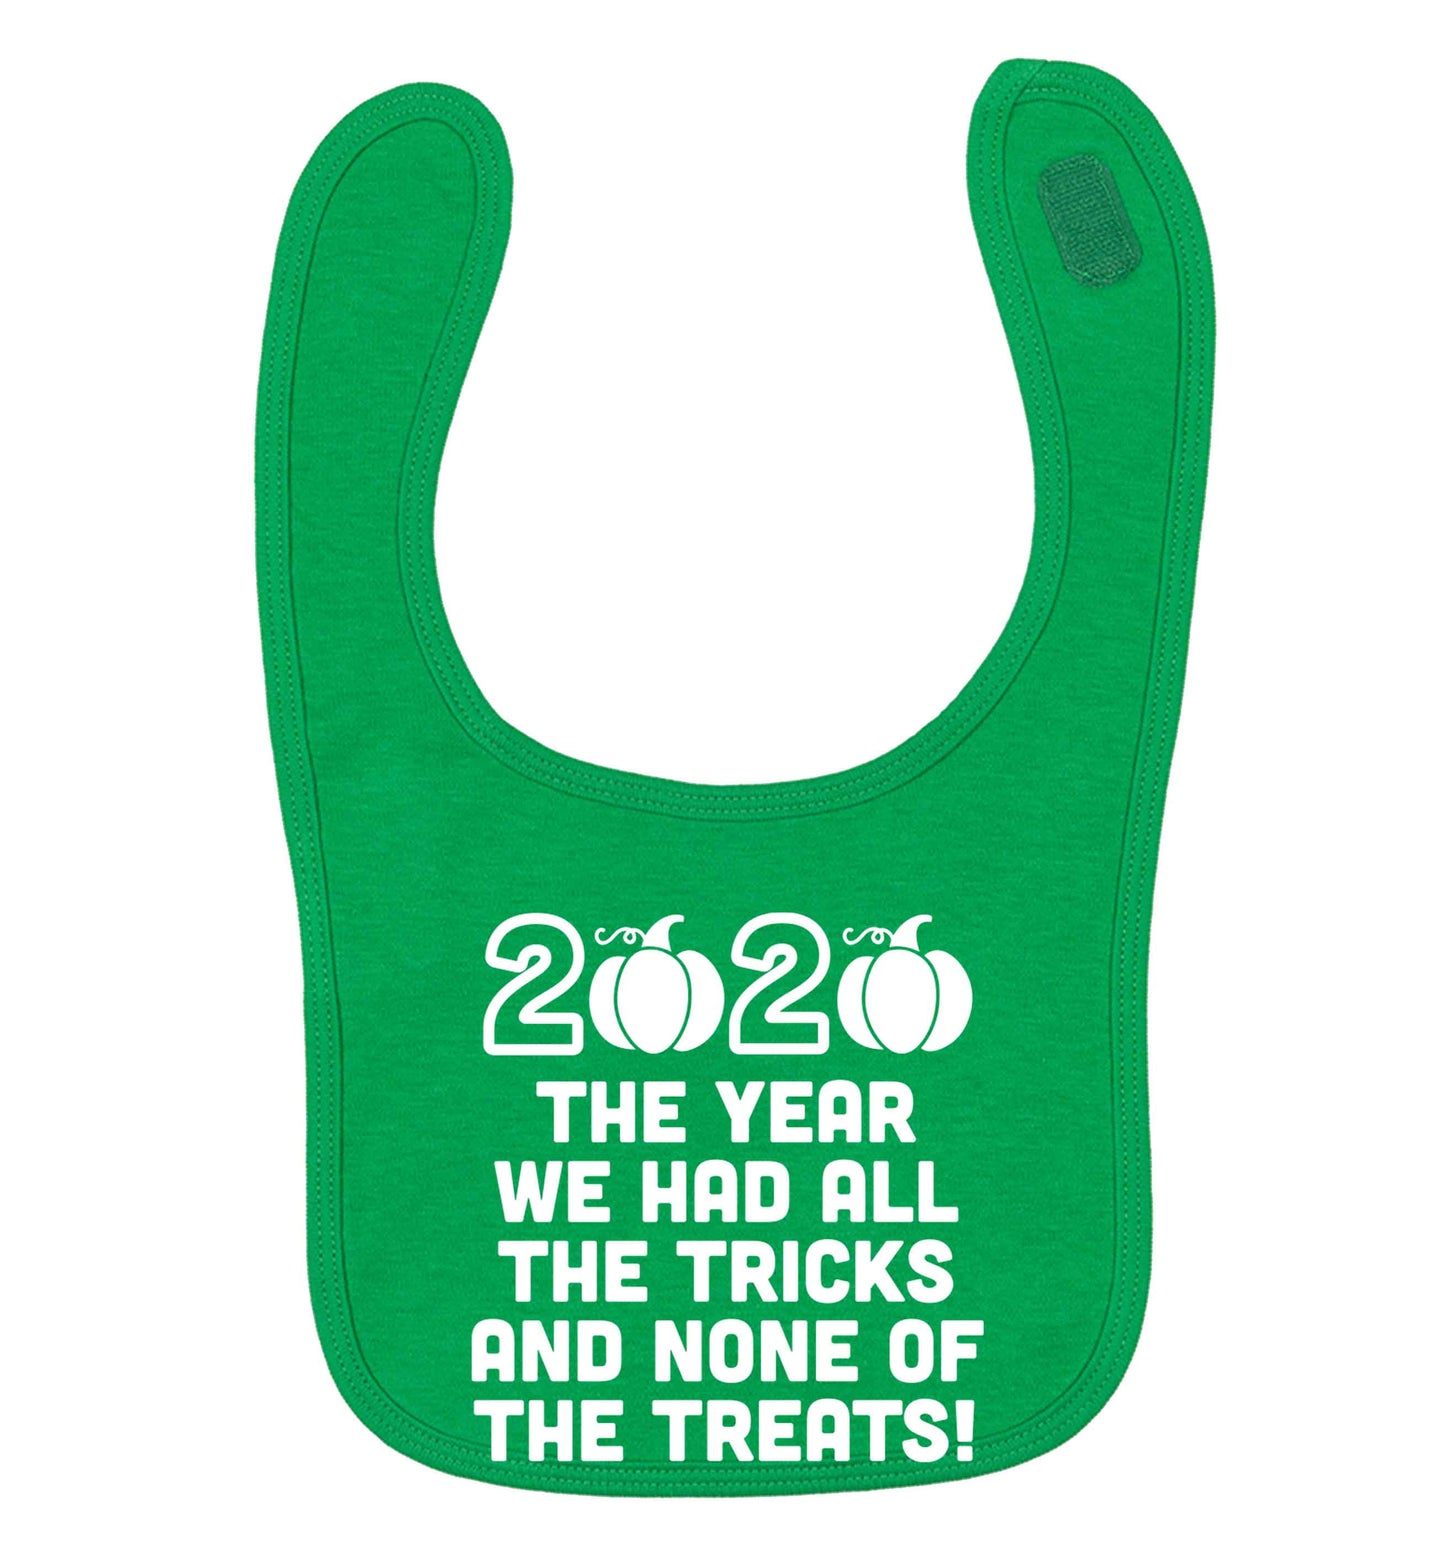 2020 The year we had all of the tricks and none of the treats green baby bib